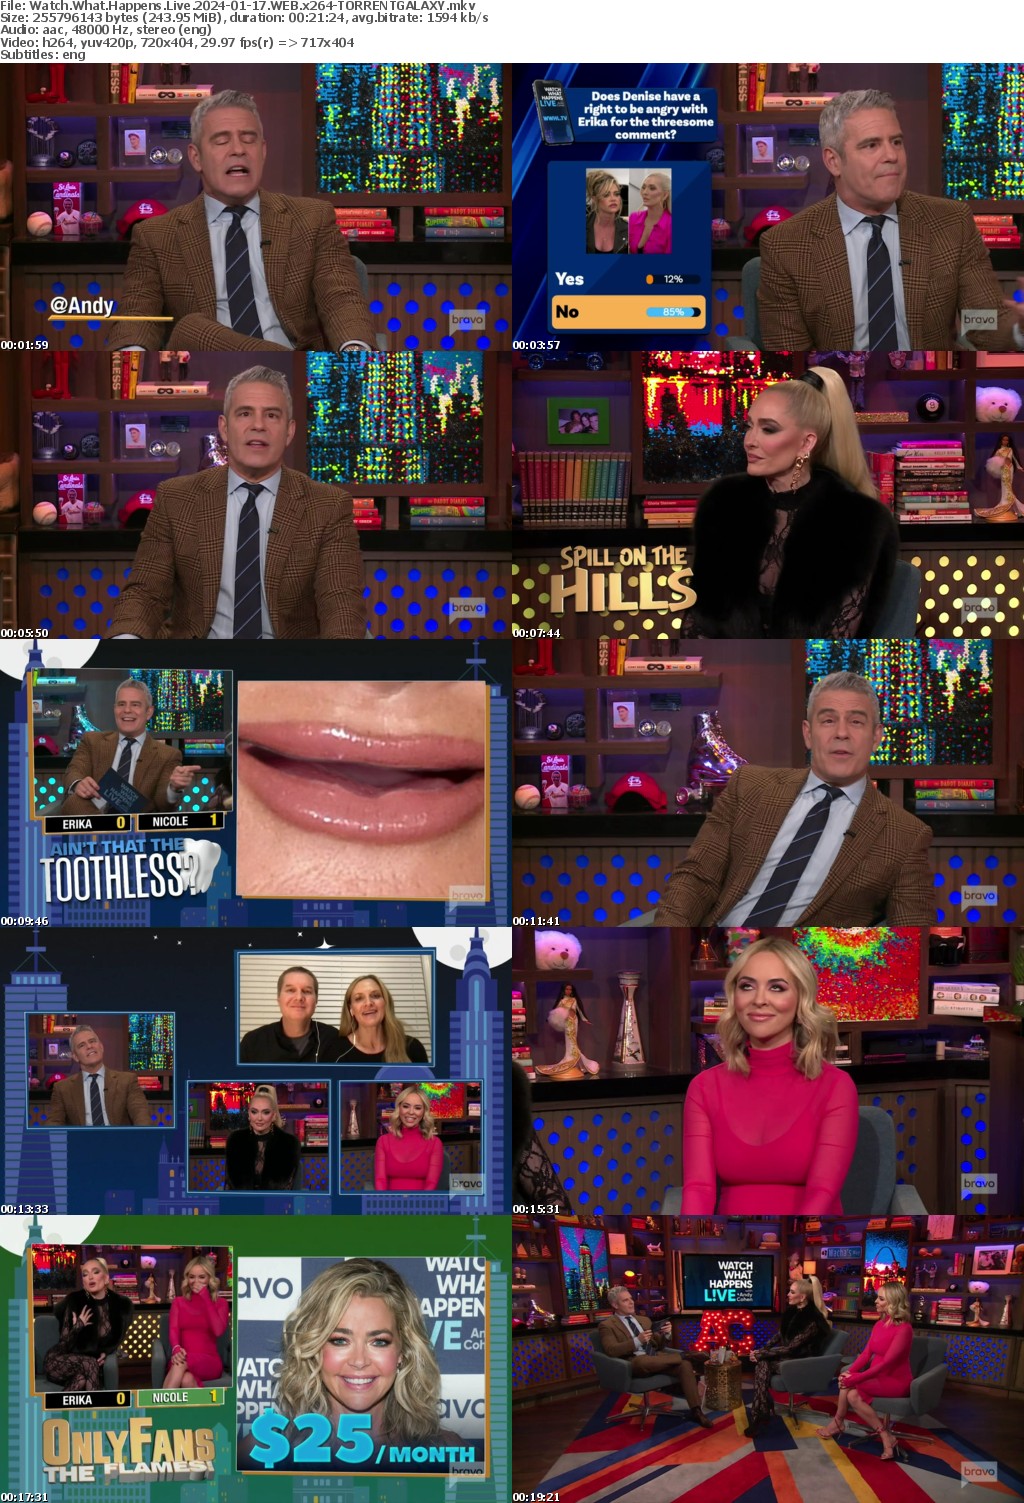 Watch What Happens Live 2024-01-17 WEB x264-GALAXY